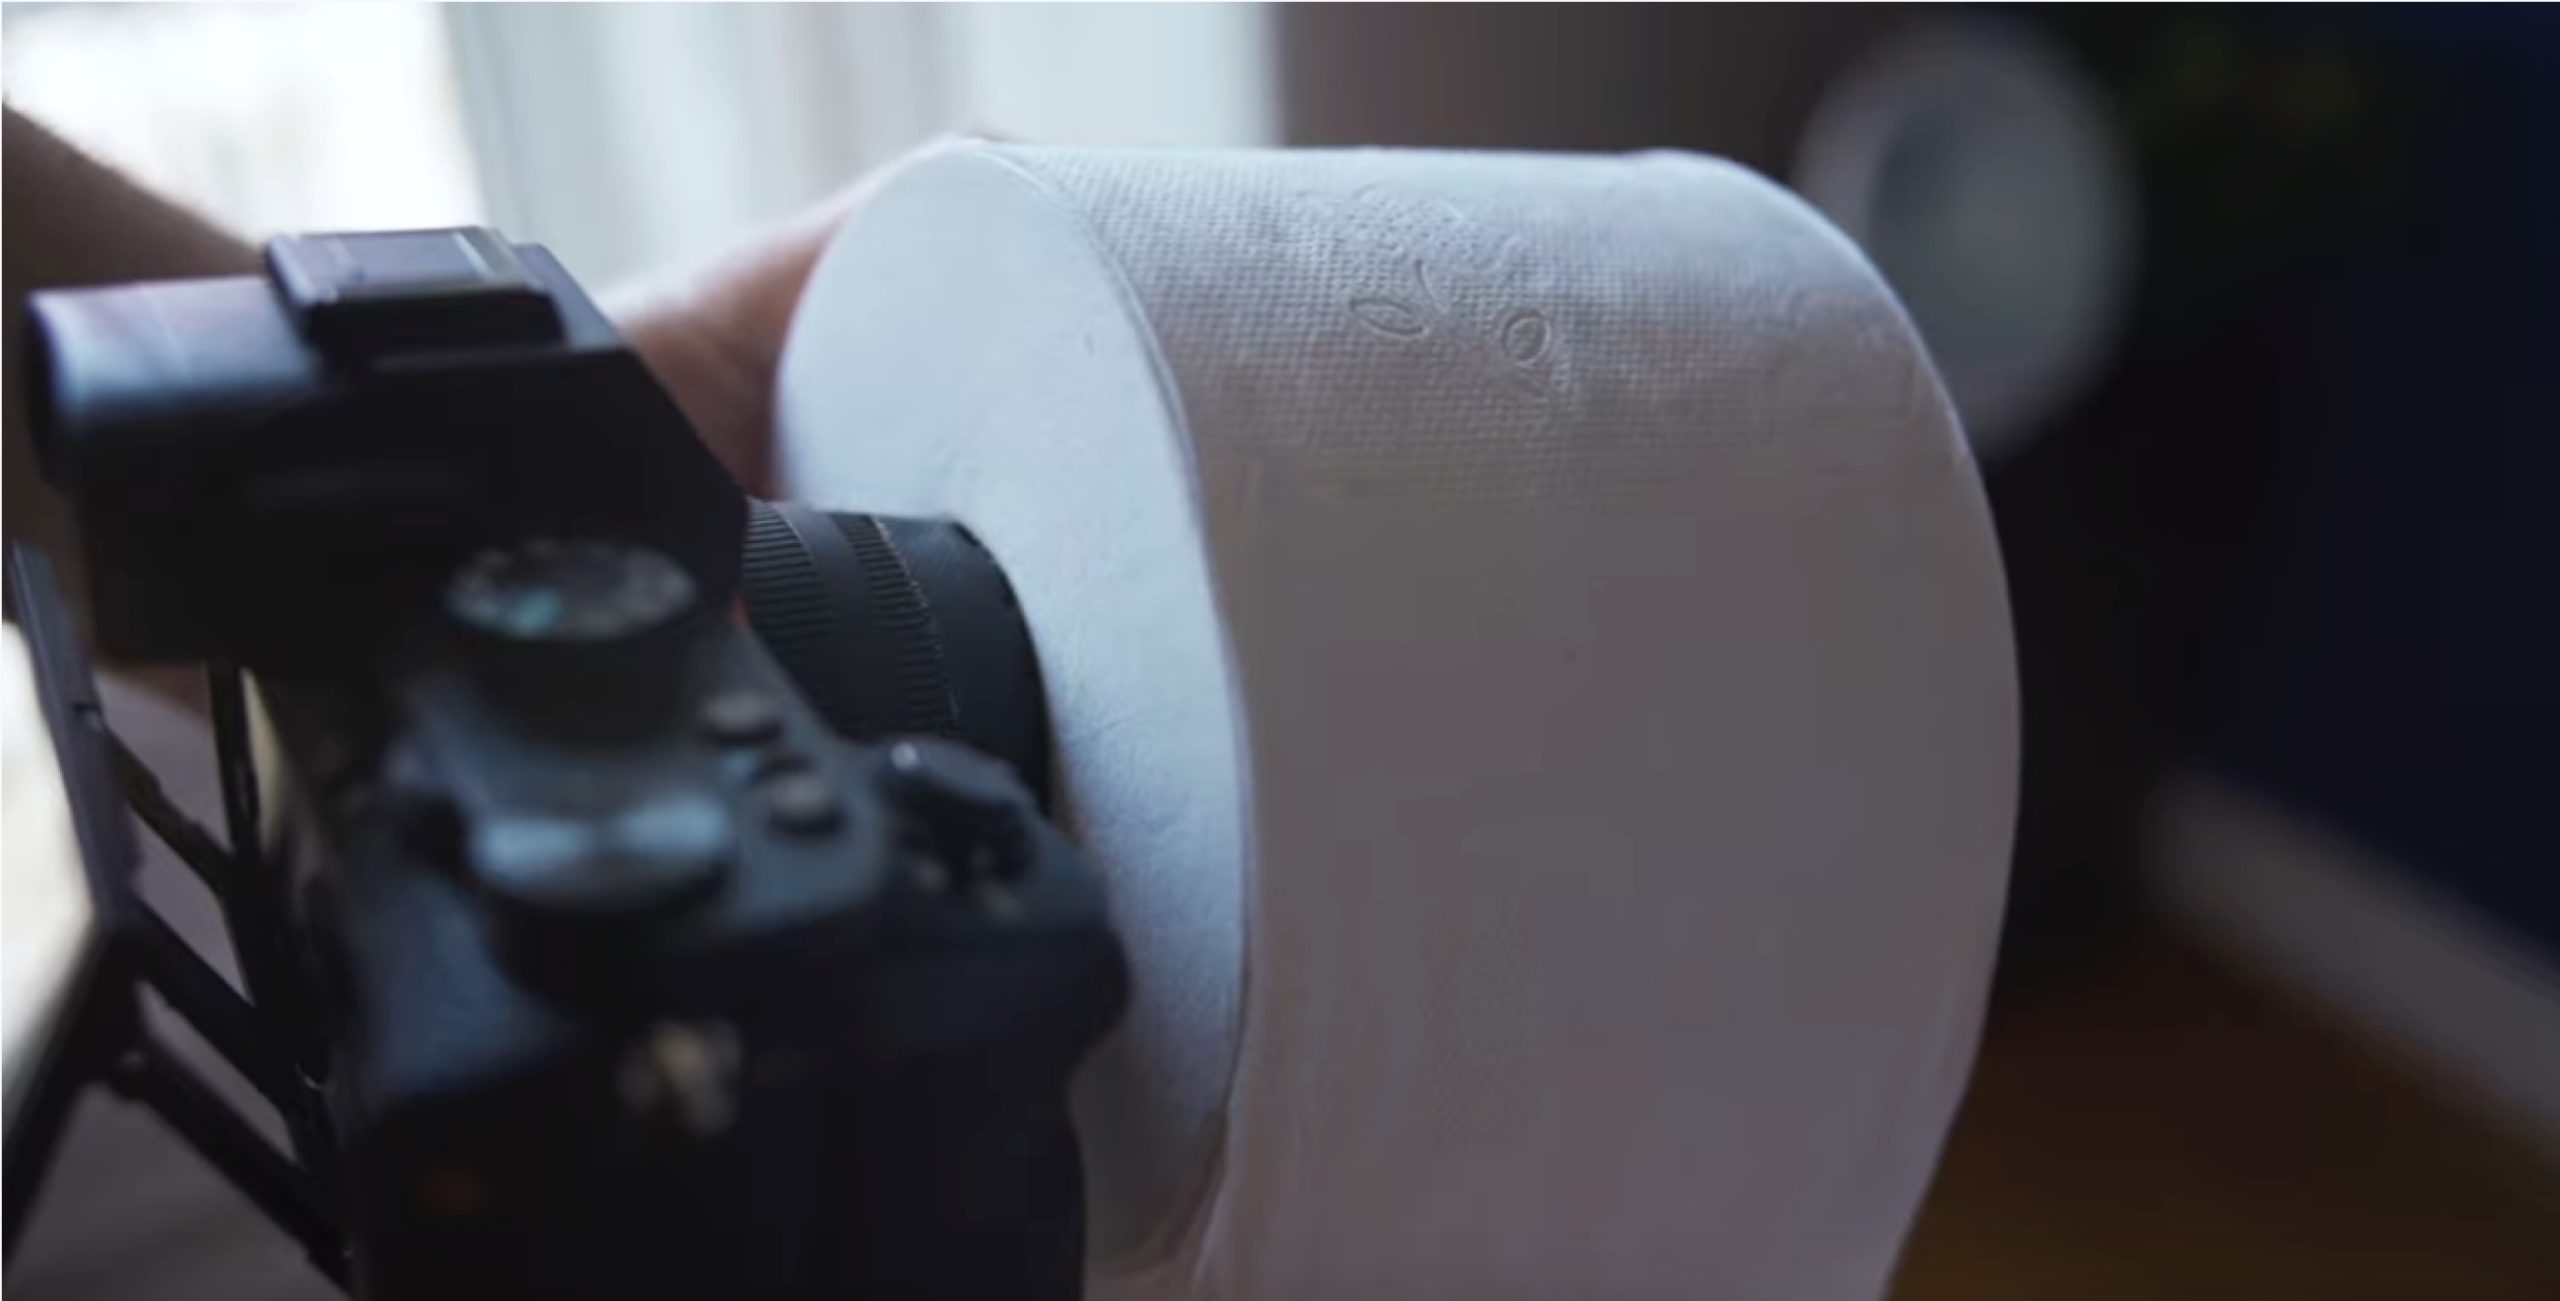 Camera Lens with Toilet Paper Roll